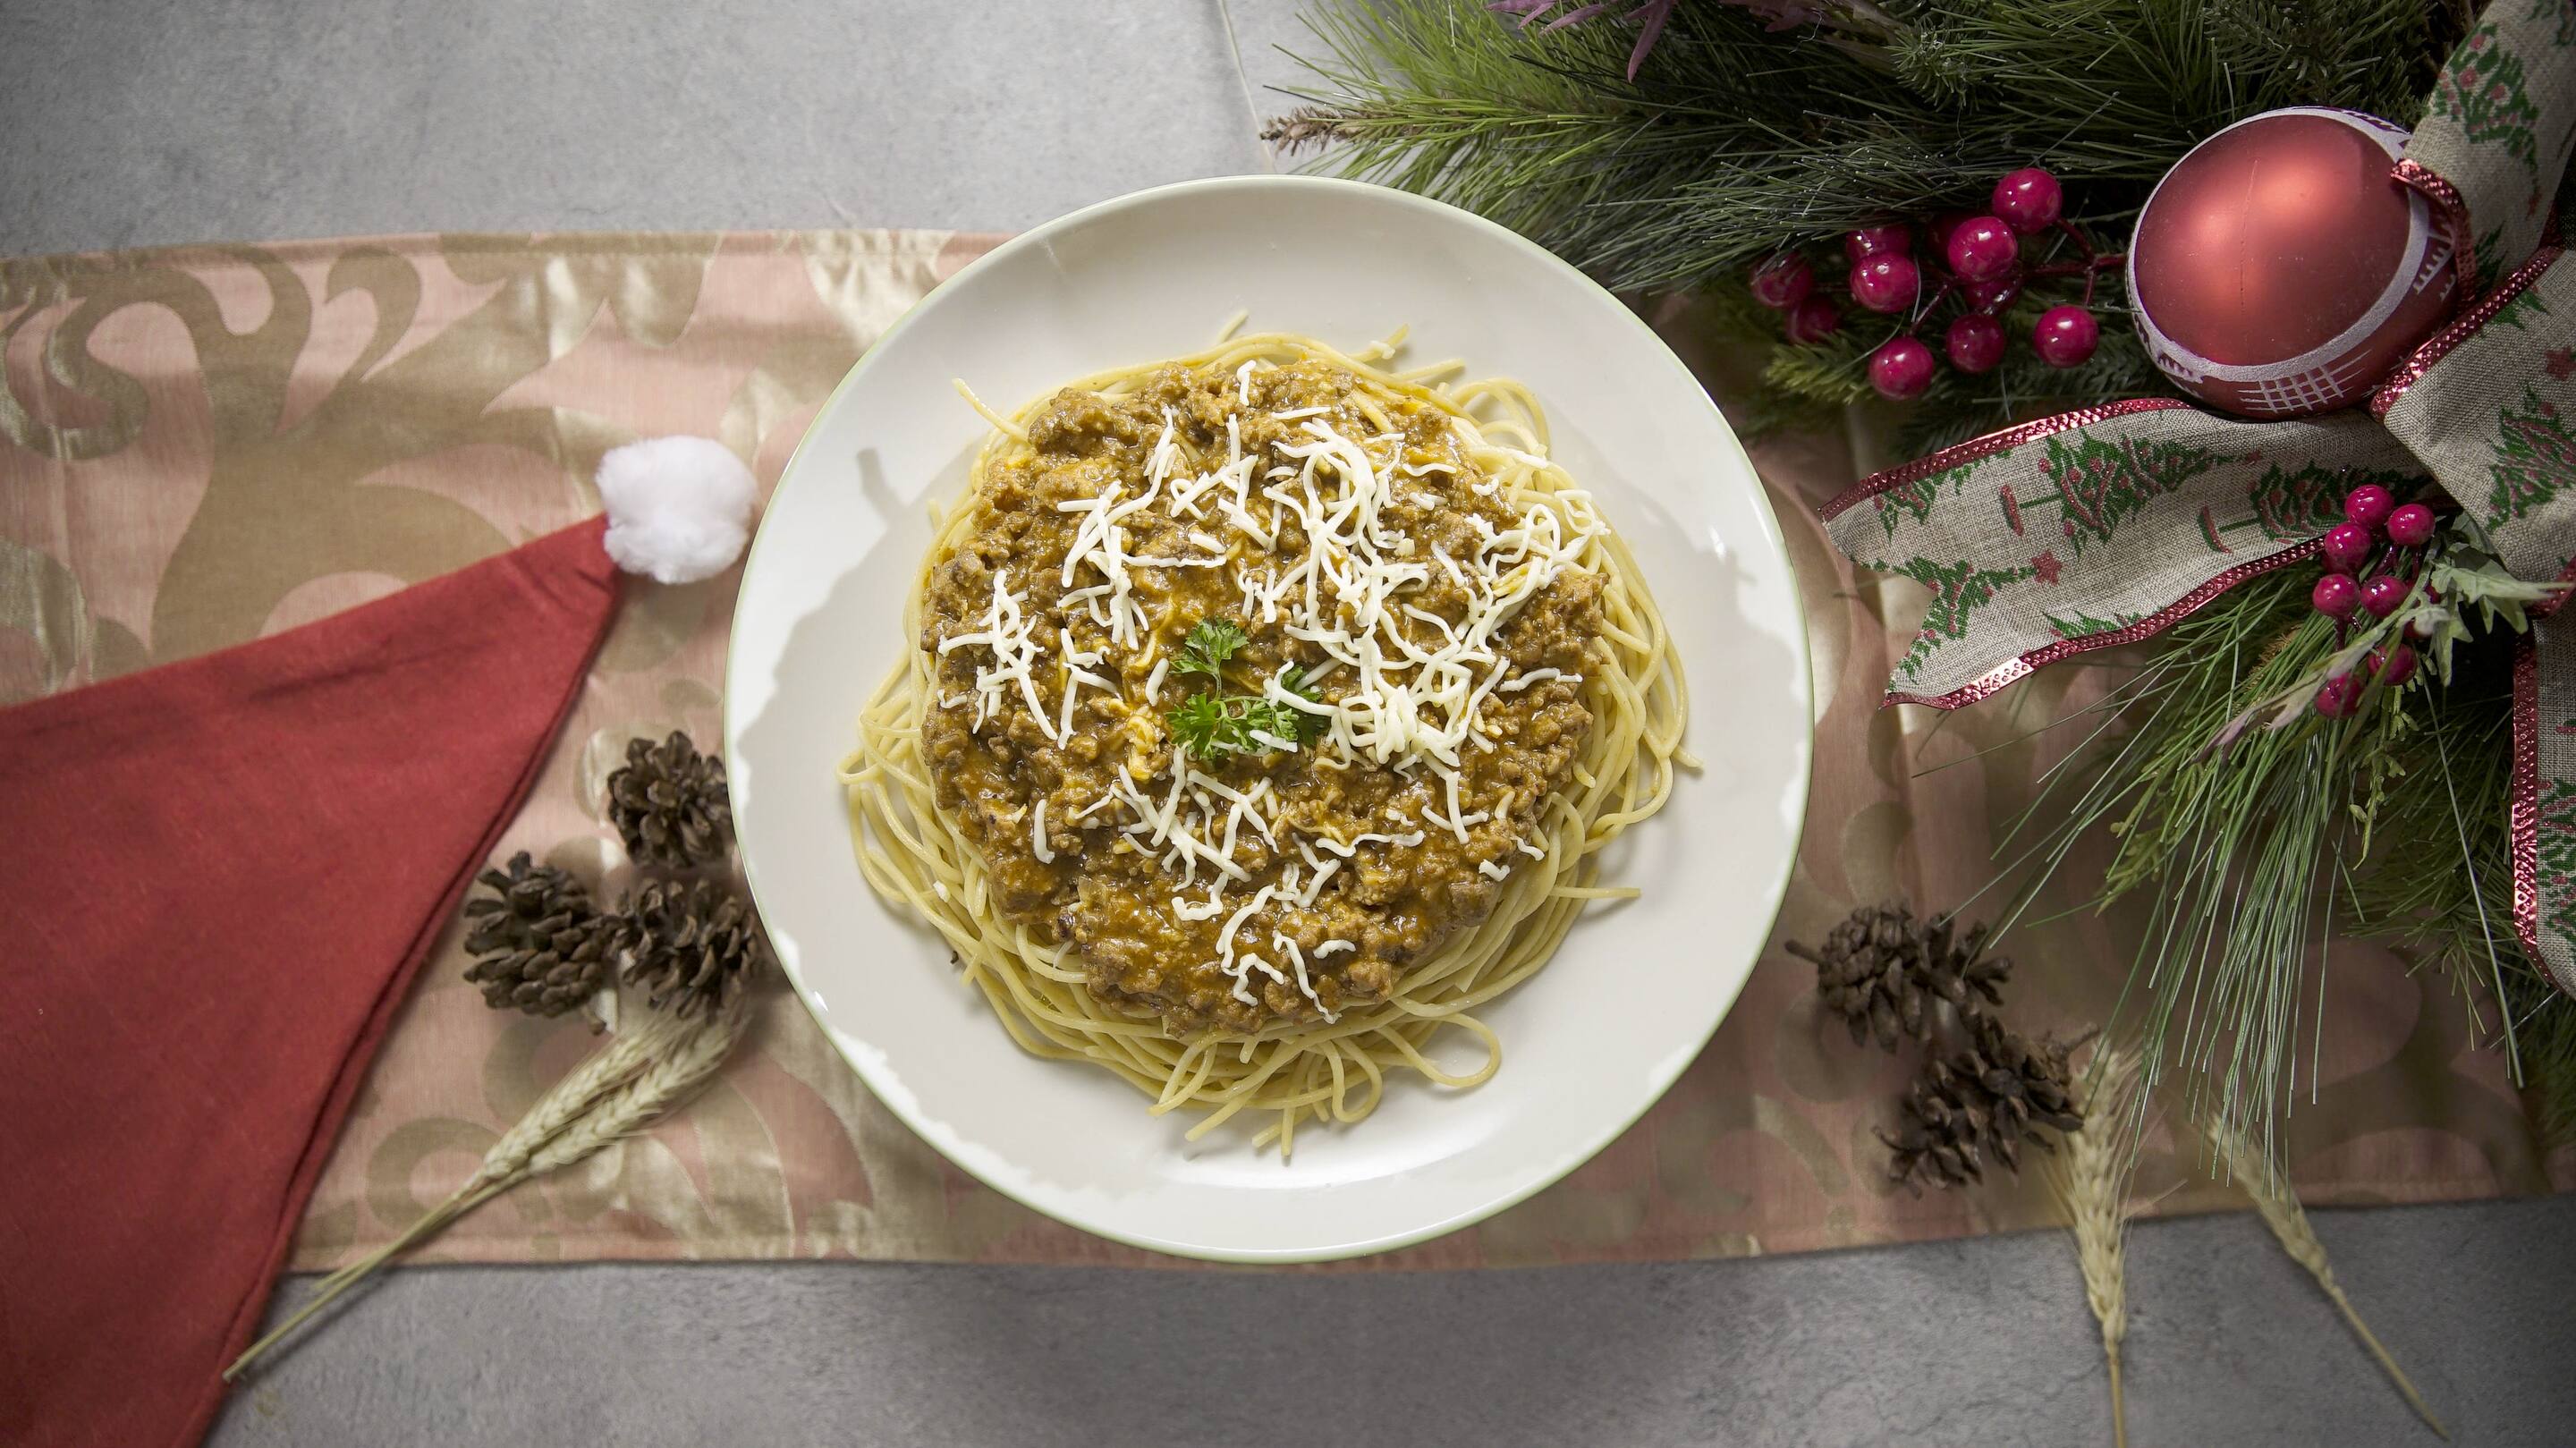 A large serving of creamy spaghetti on a table decorated with Christmas elements